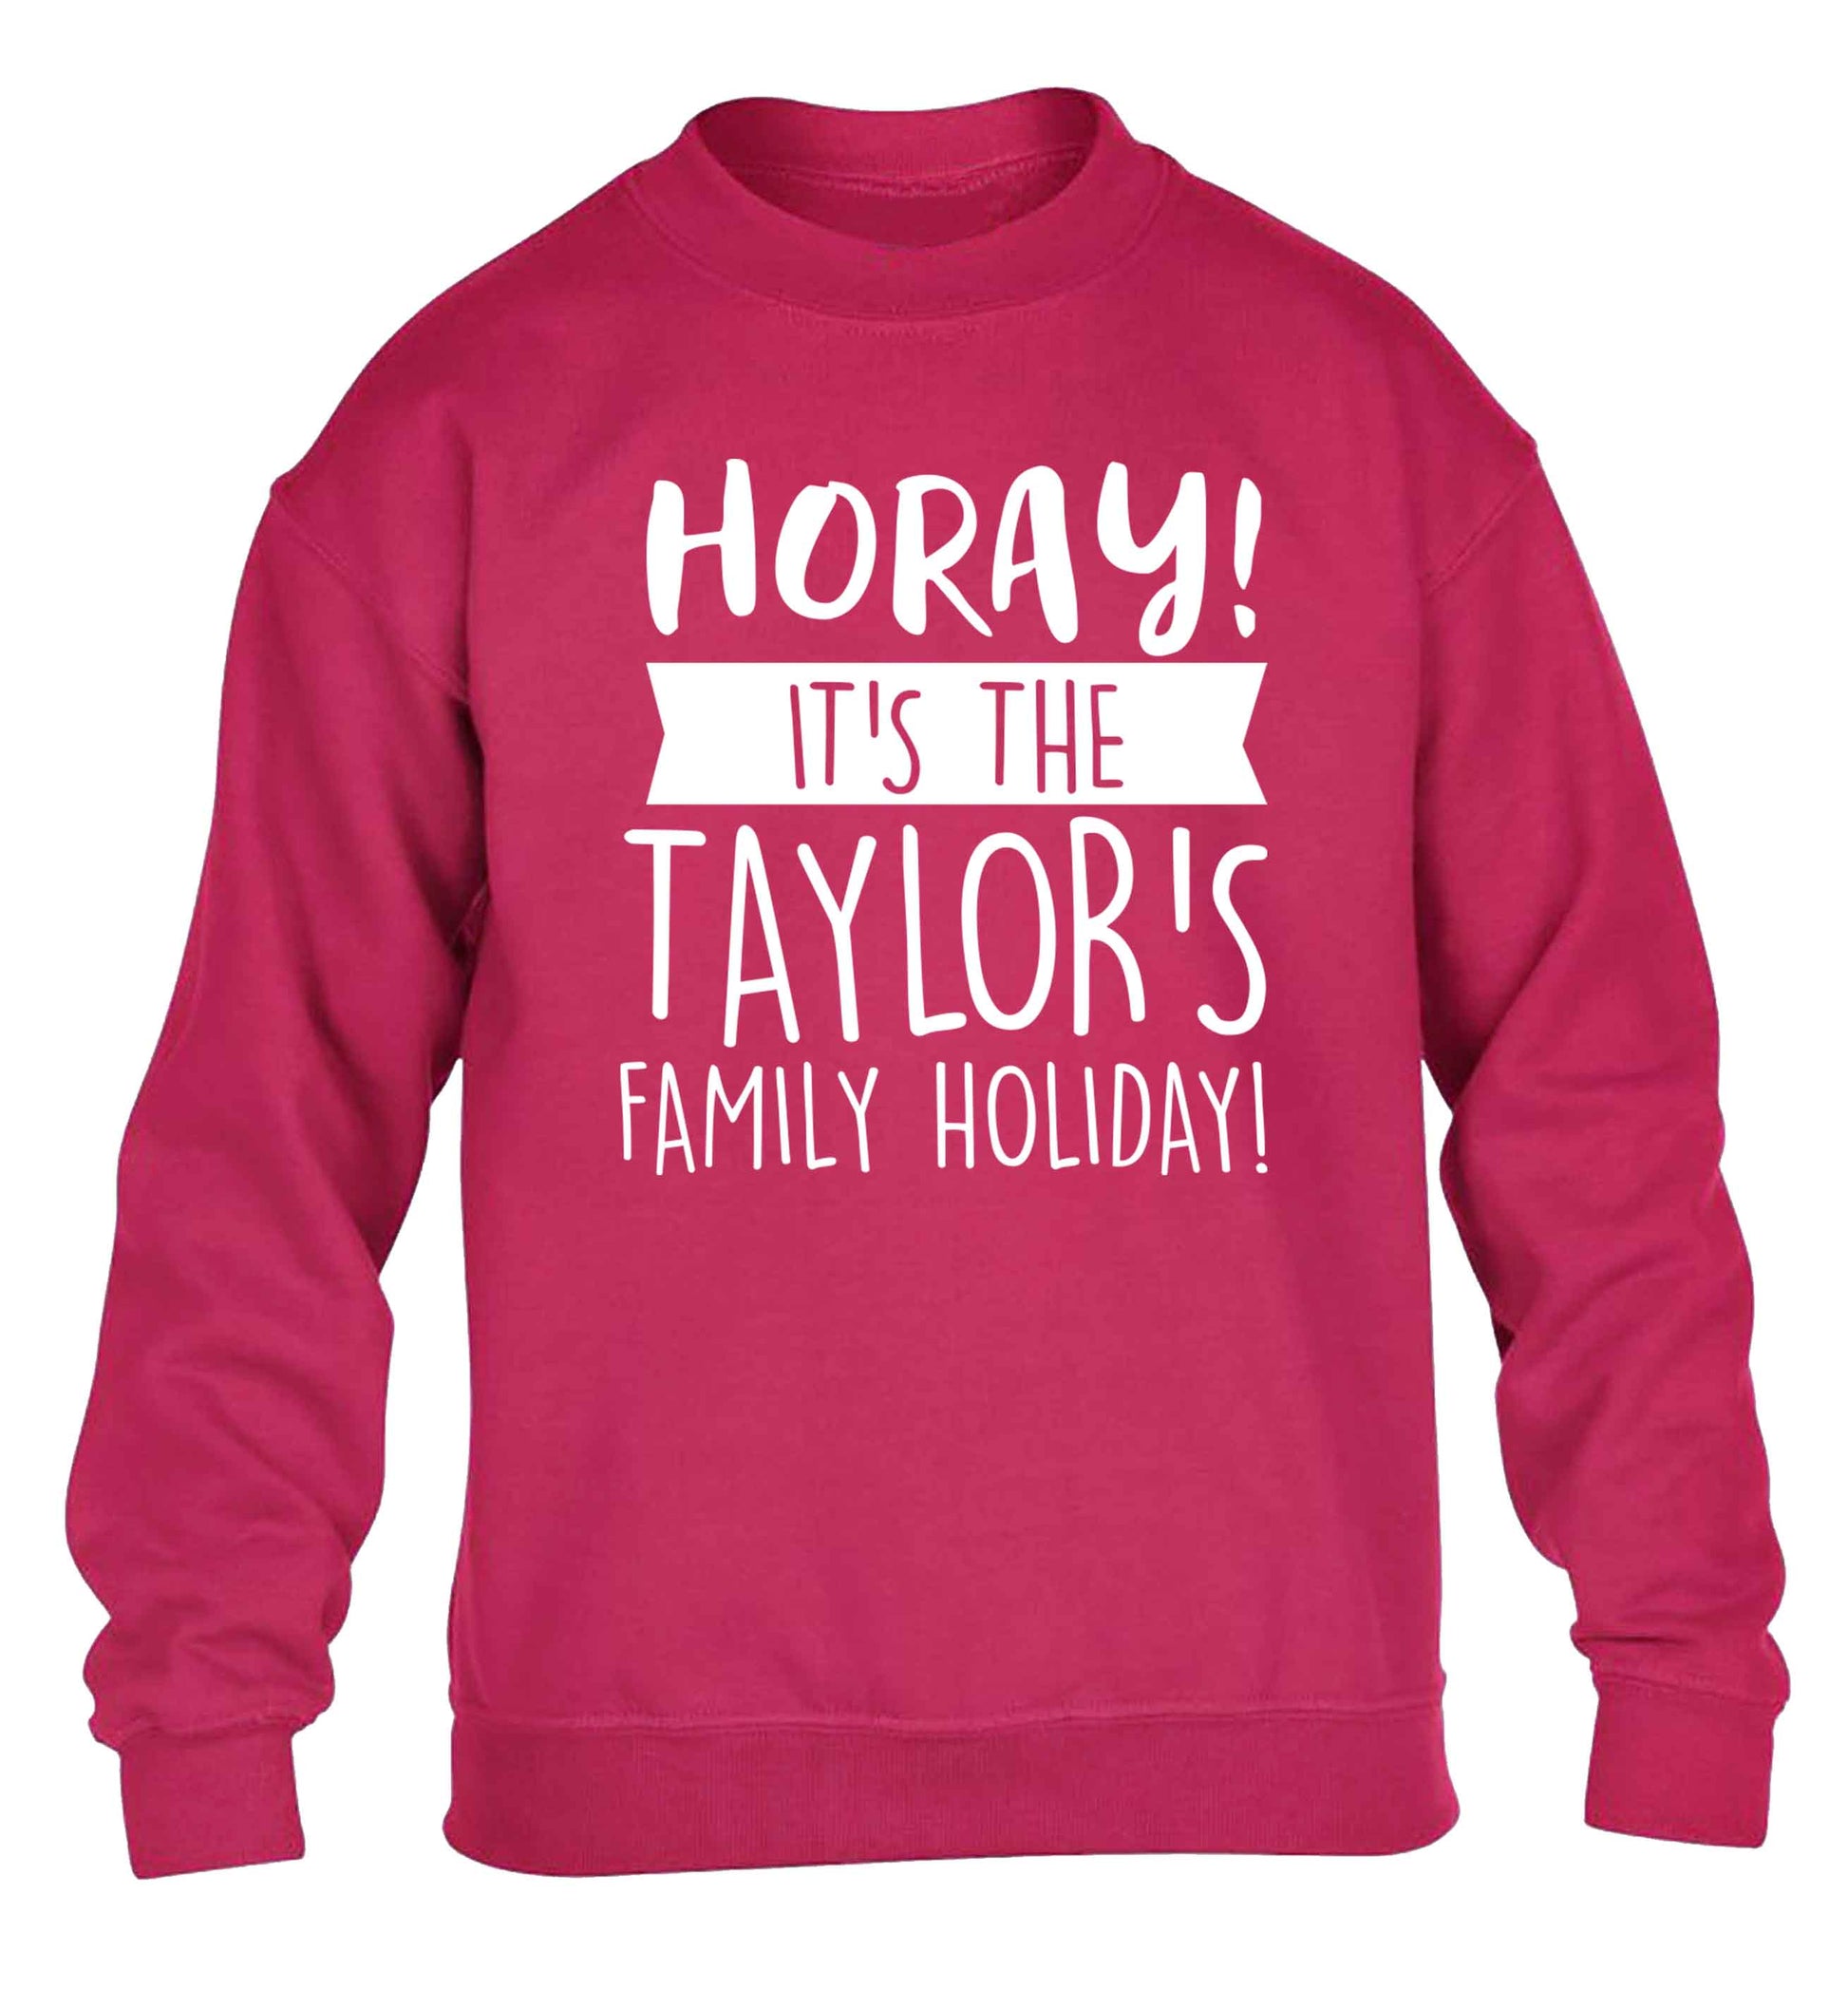 Horay it's the Taylor's family holiday! personalised item children's pink sweater 12-13 Years